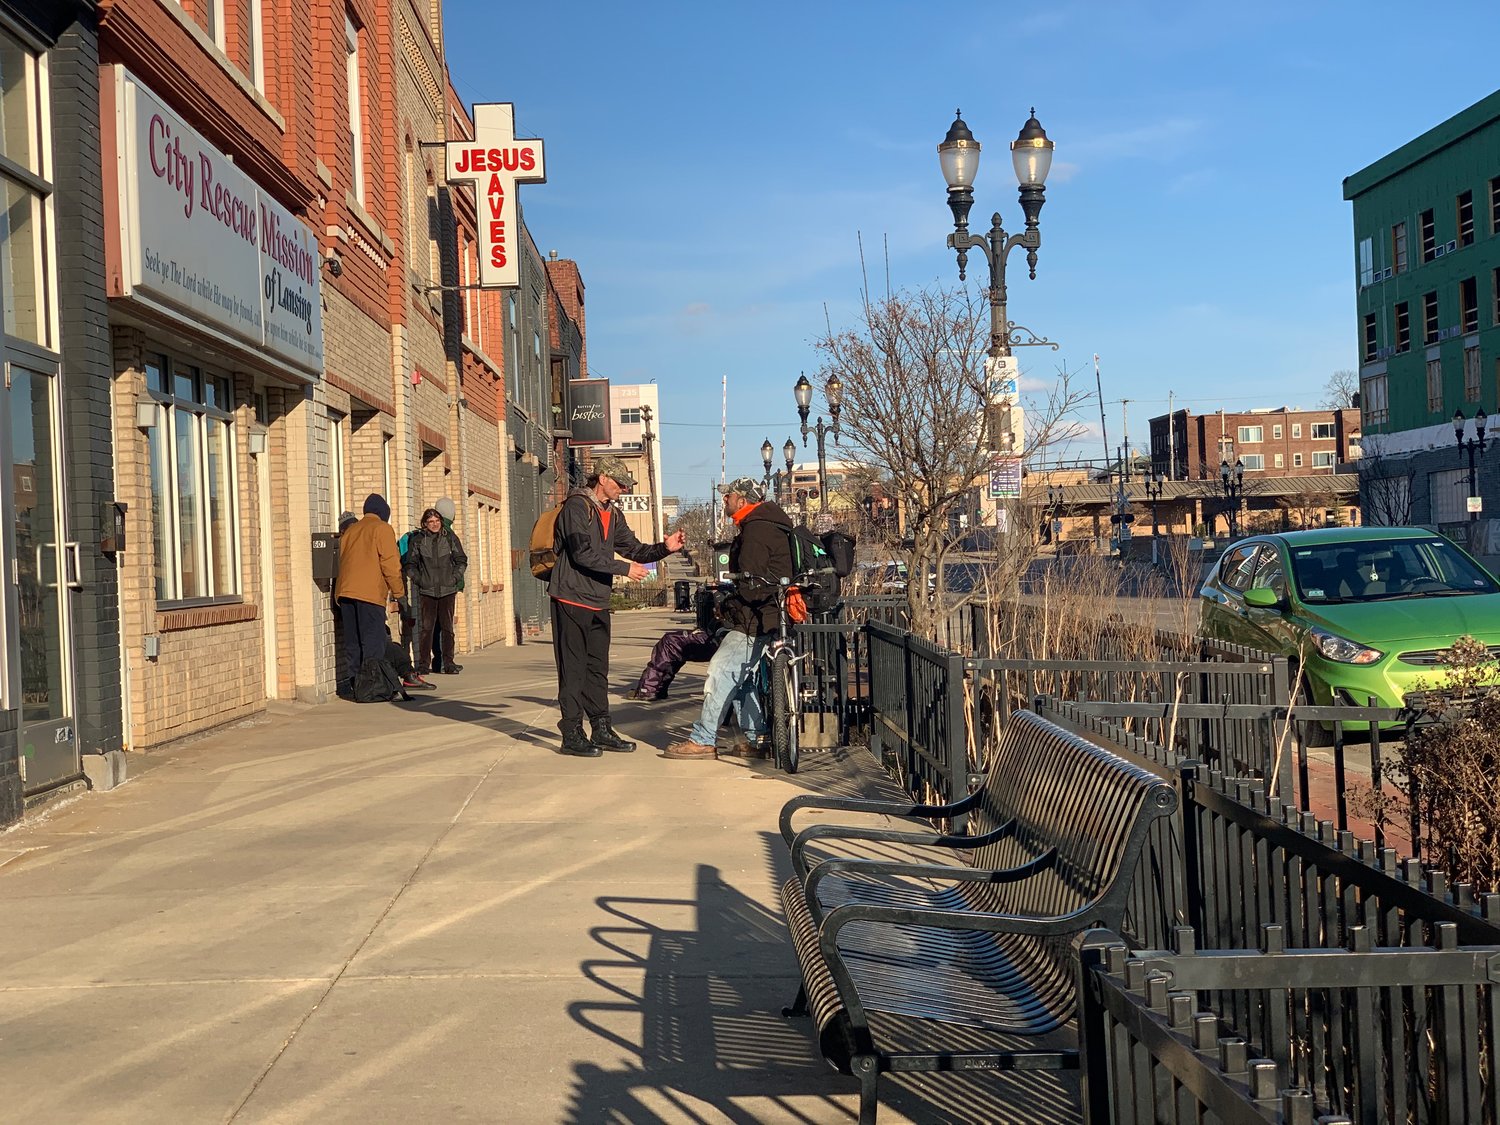 Several men gathered for meal service last month outside the City Rescue Mission on Michigan Avenue.